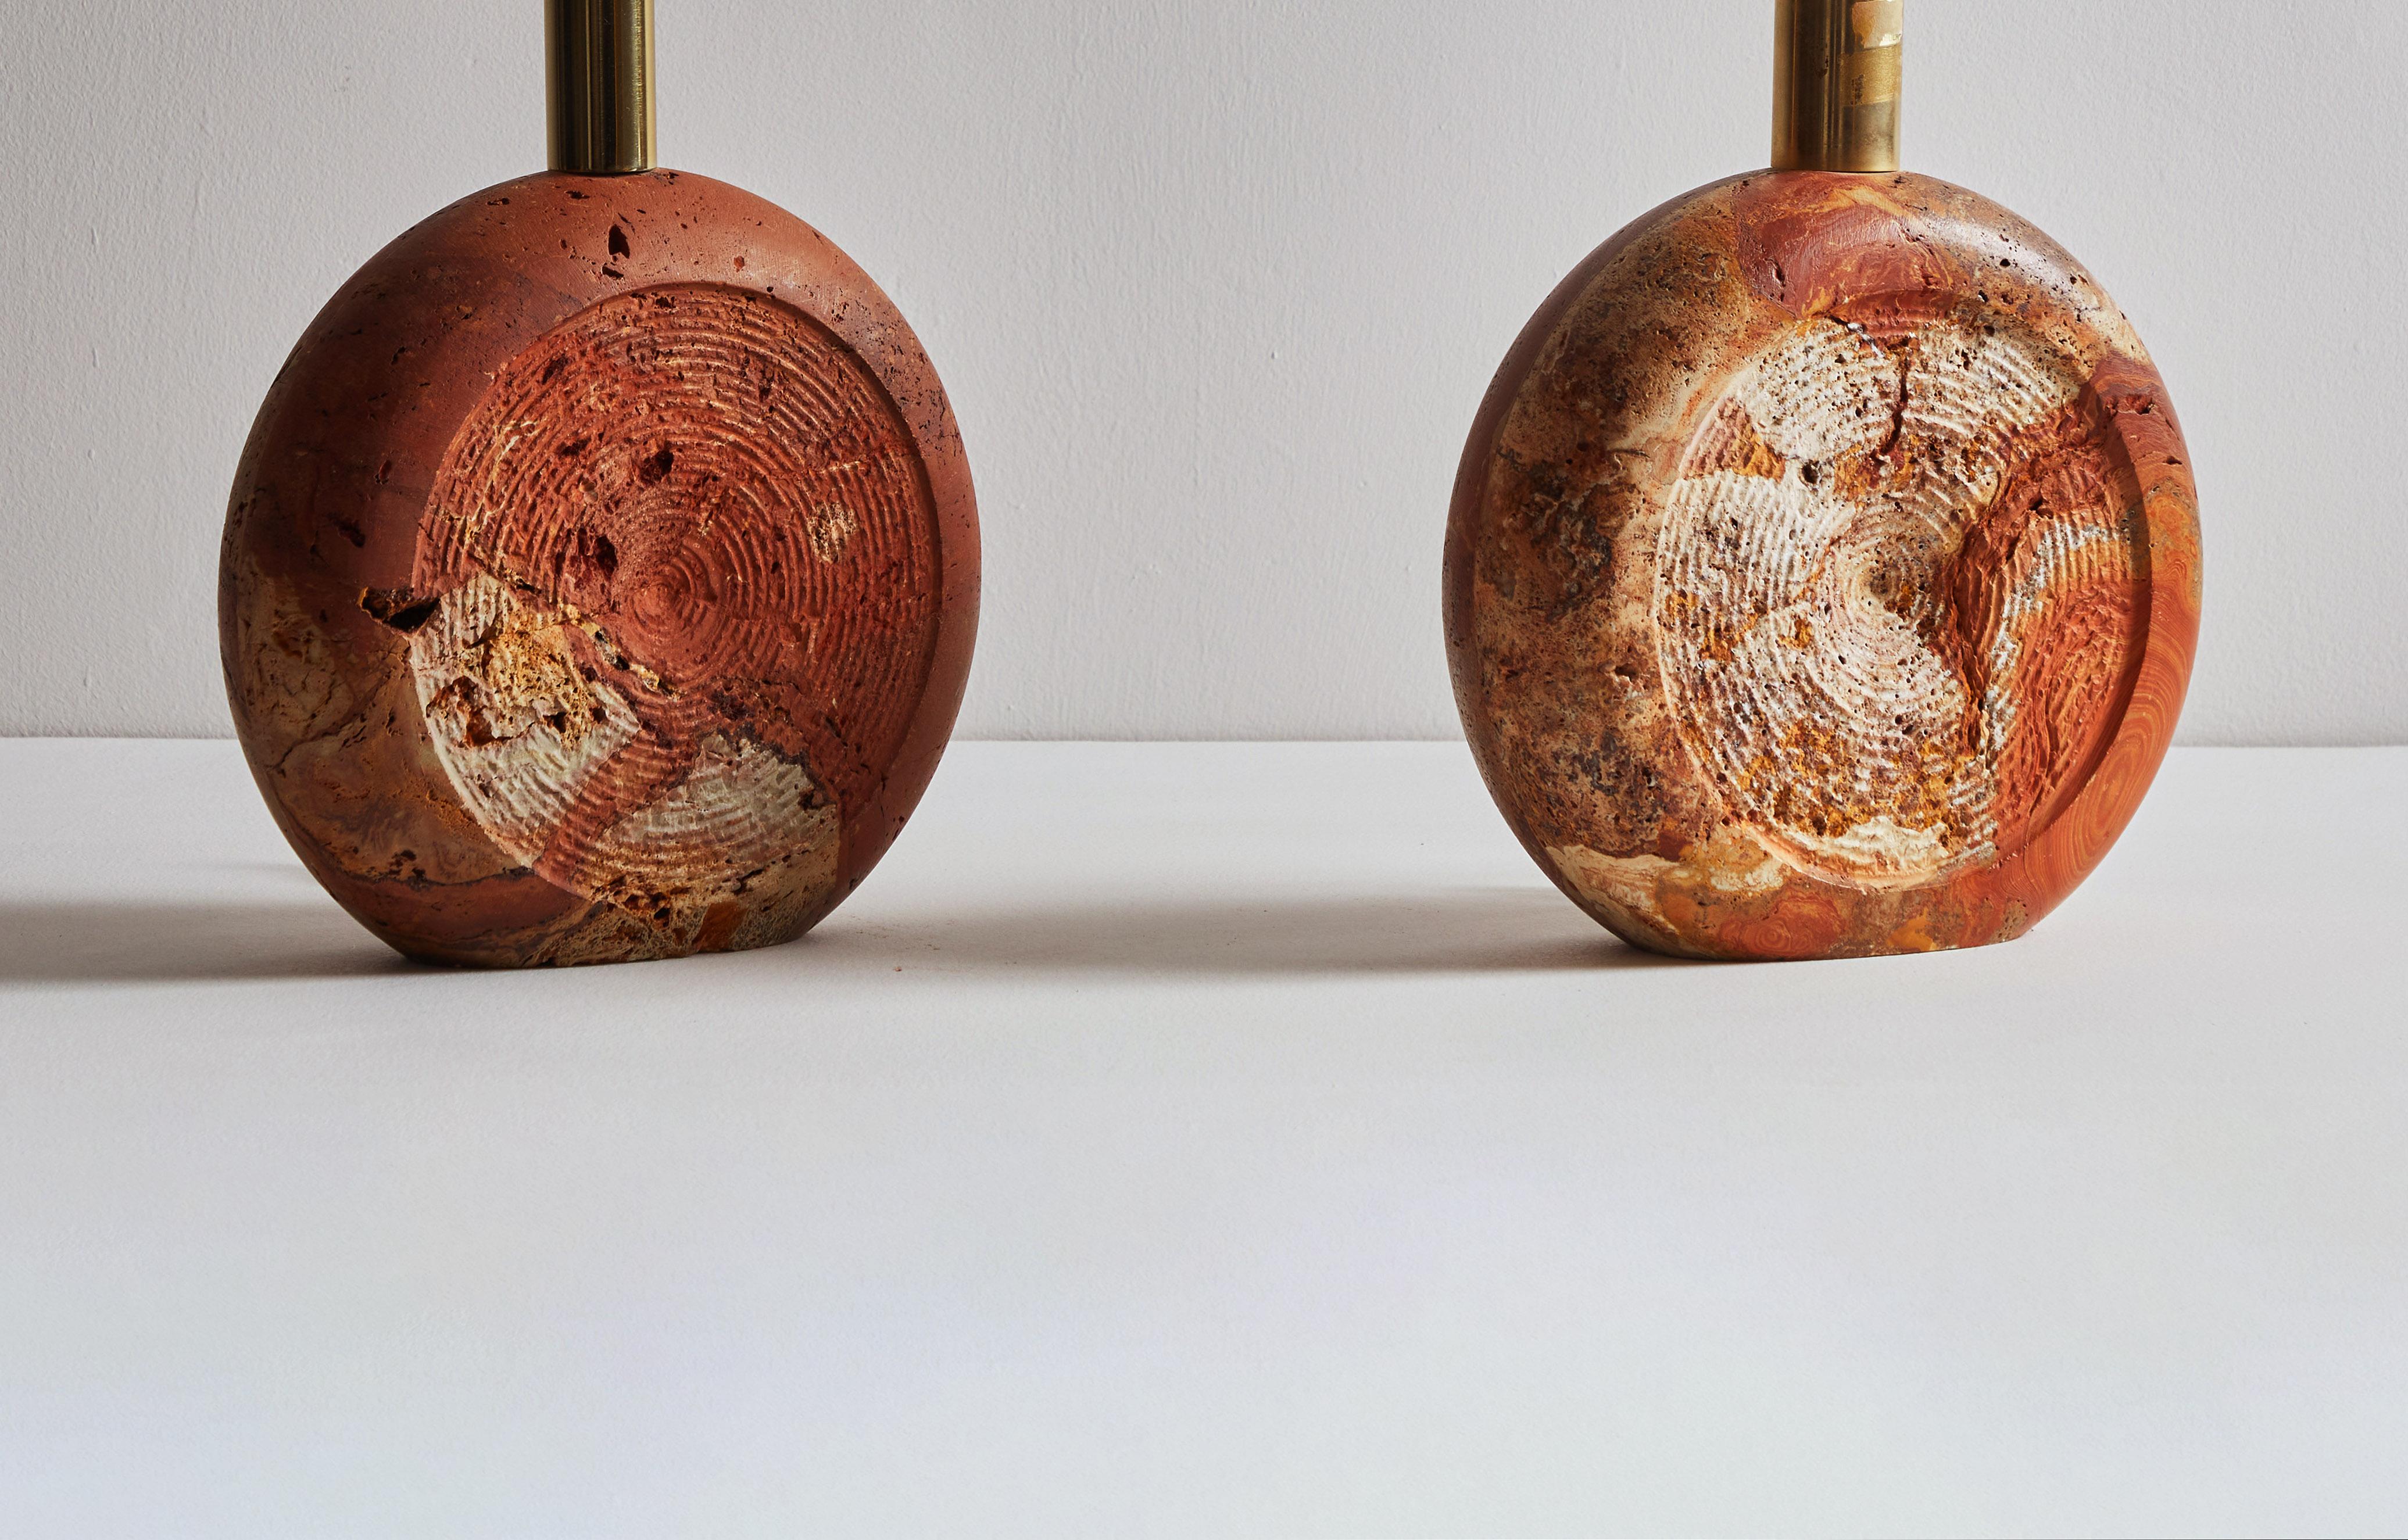 Pair of Travertine table lamps by Fratelli Manelli. Designed and manufactured in Italy, circa 1960s. Rapolano red travertine, brass. Original cord, wired for U.S. sockets. Custom shades available upon request for an additional fee. Retains original